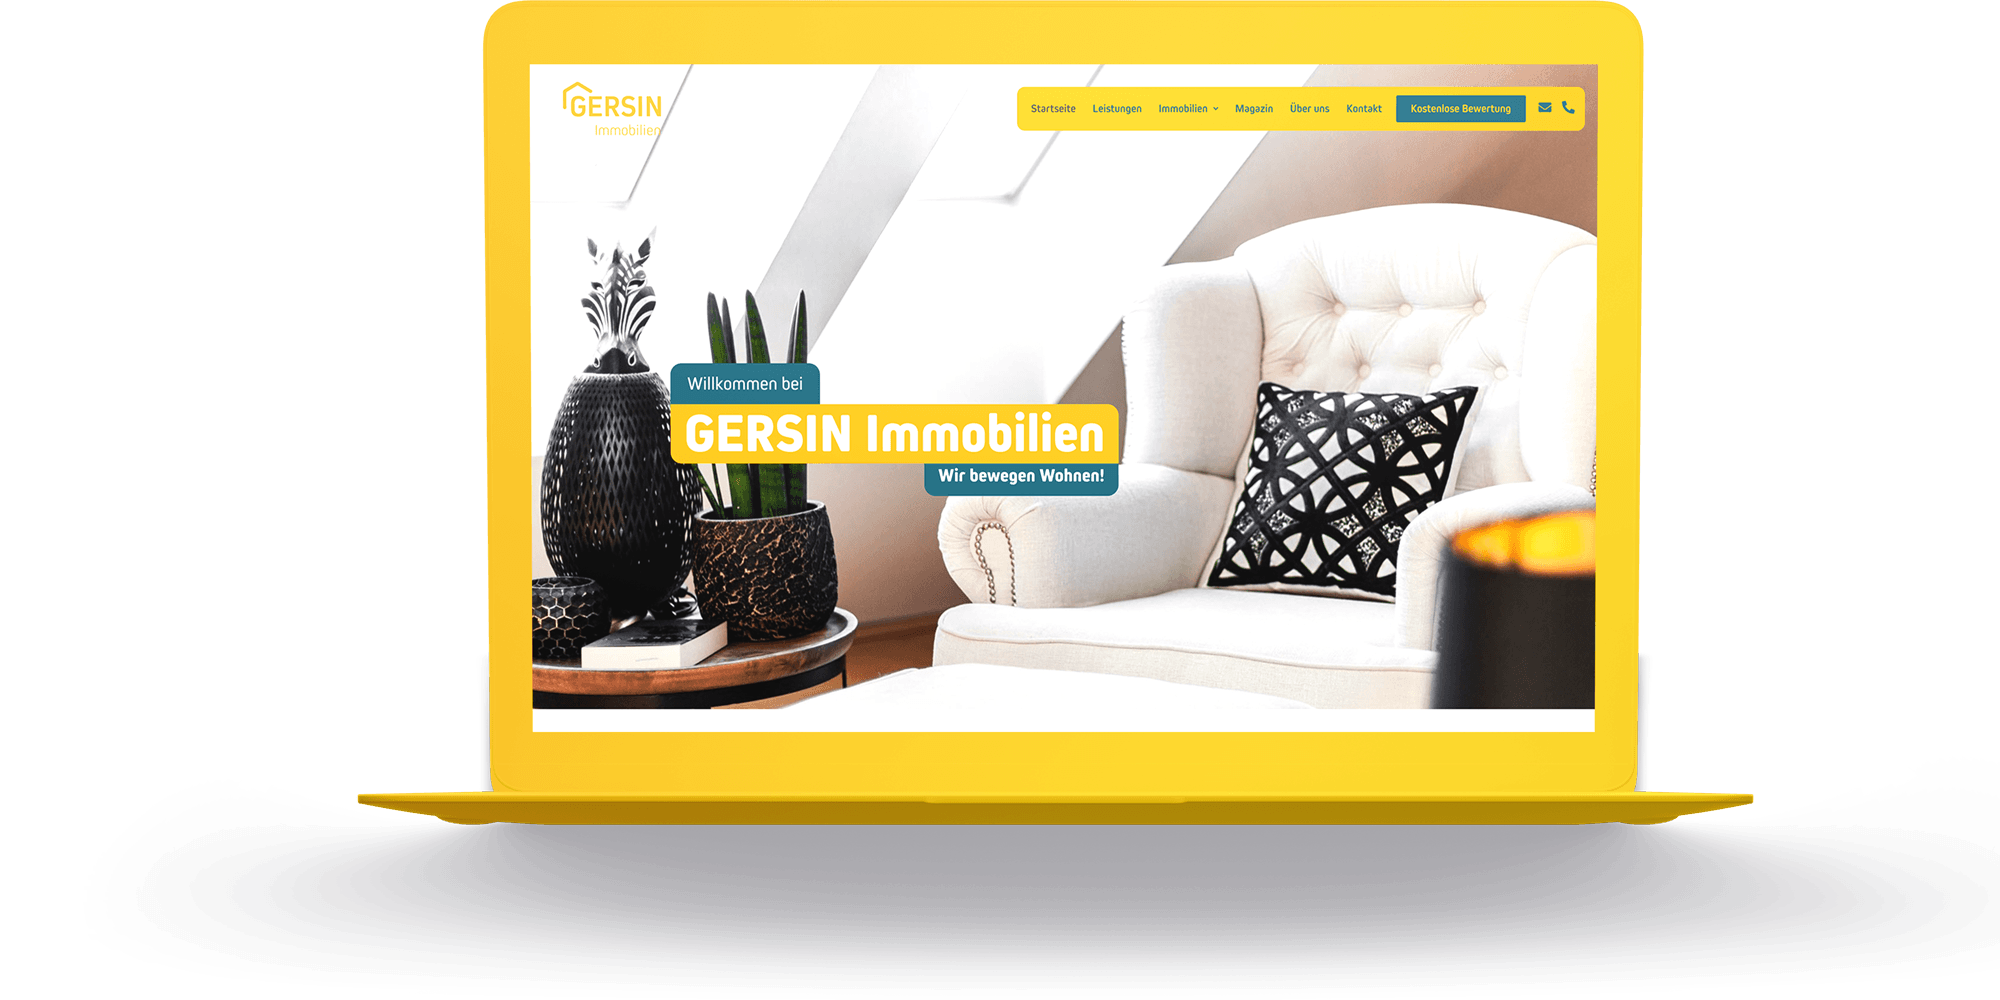 A laptop with furniture on a yellow background showcasing Gersin Real Estate.